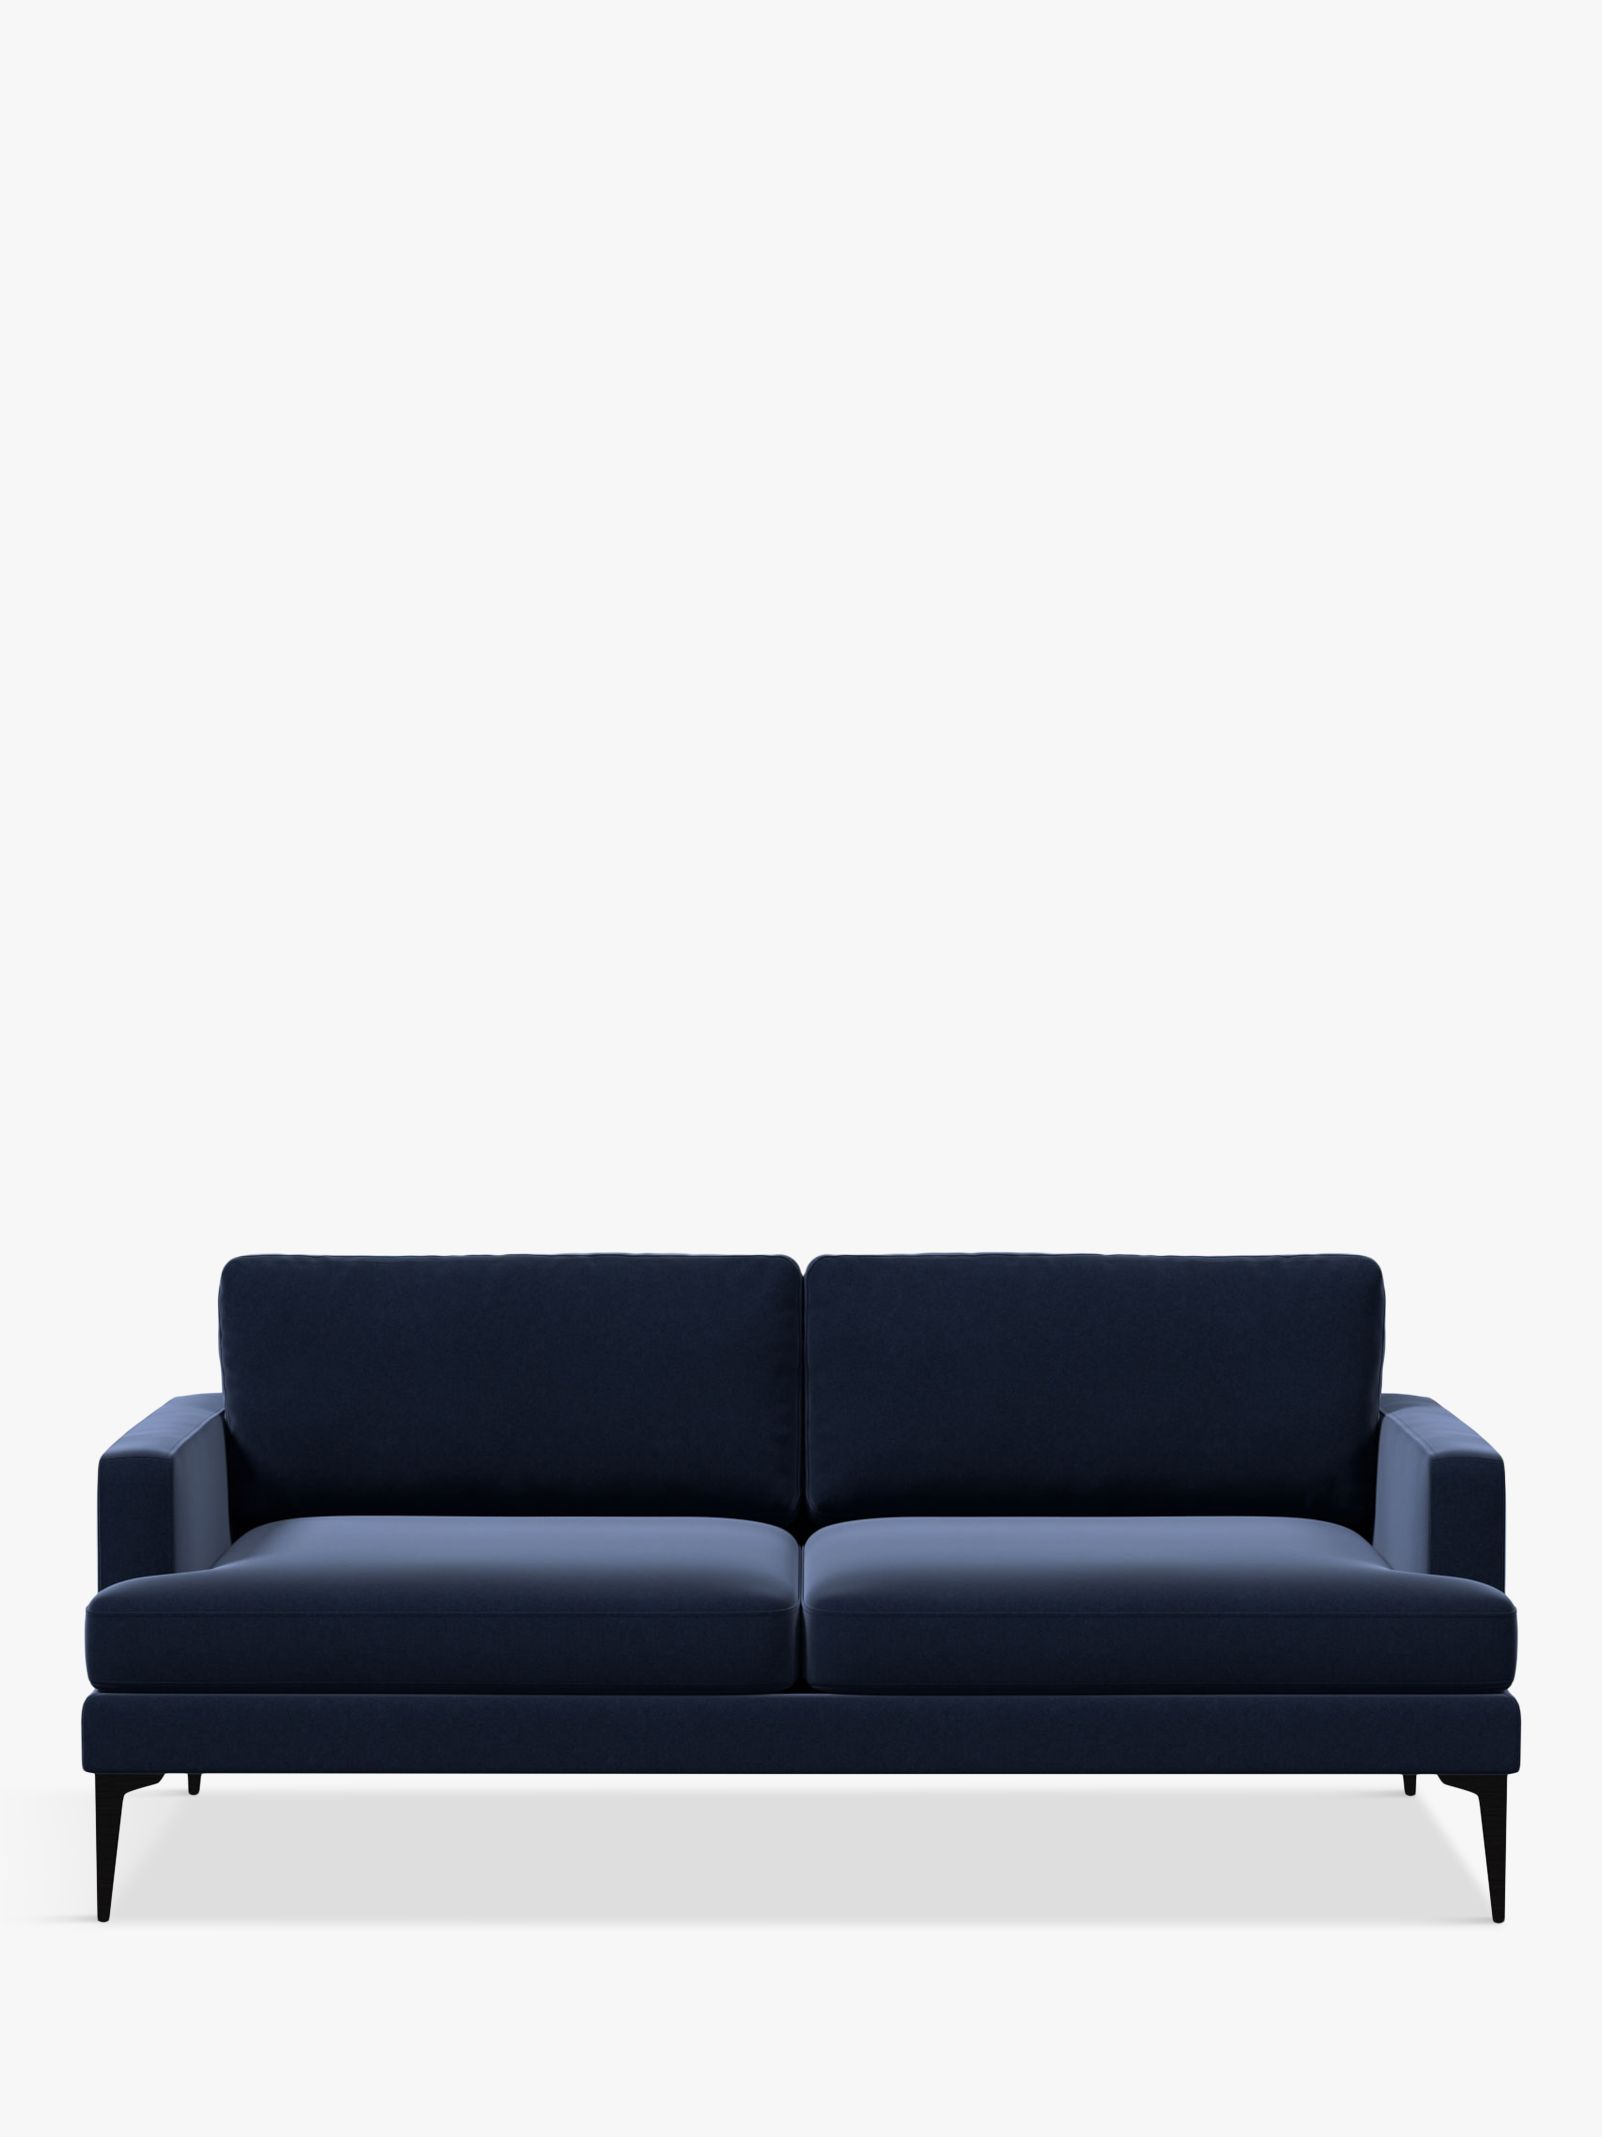 west elm Andes Large 3 Seater Sofa